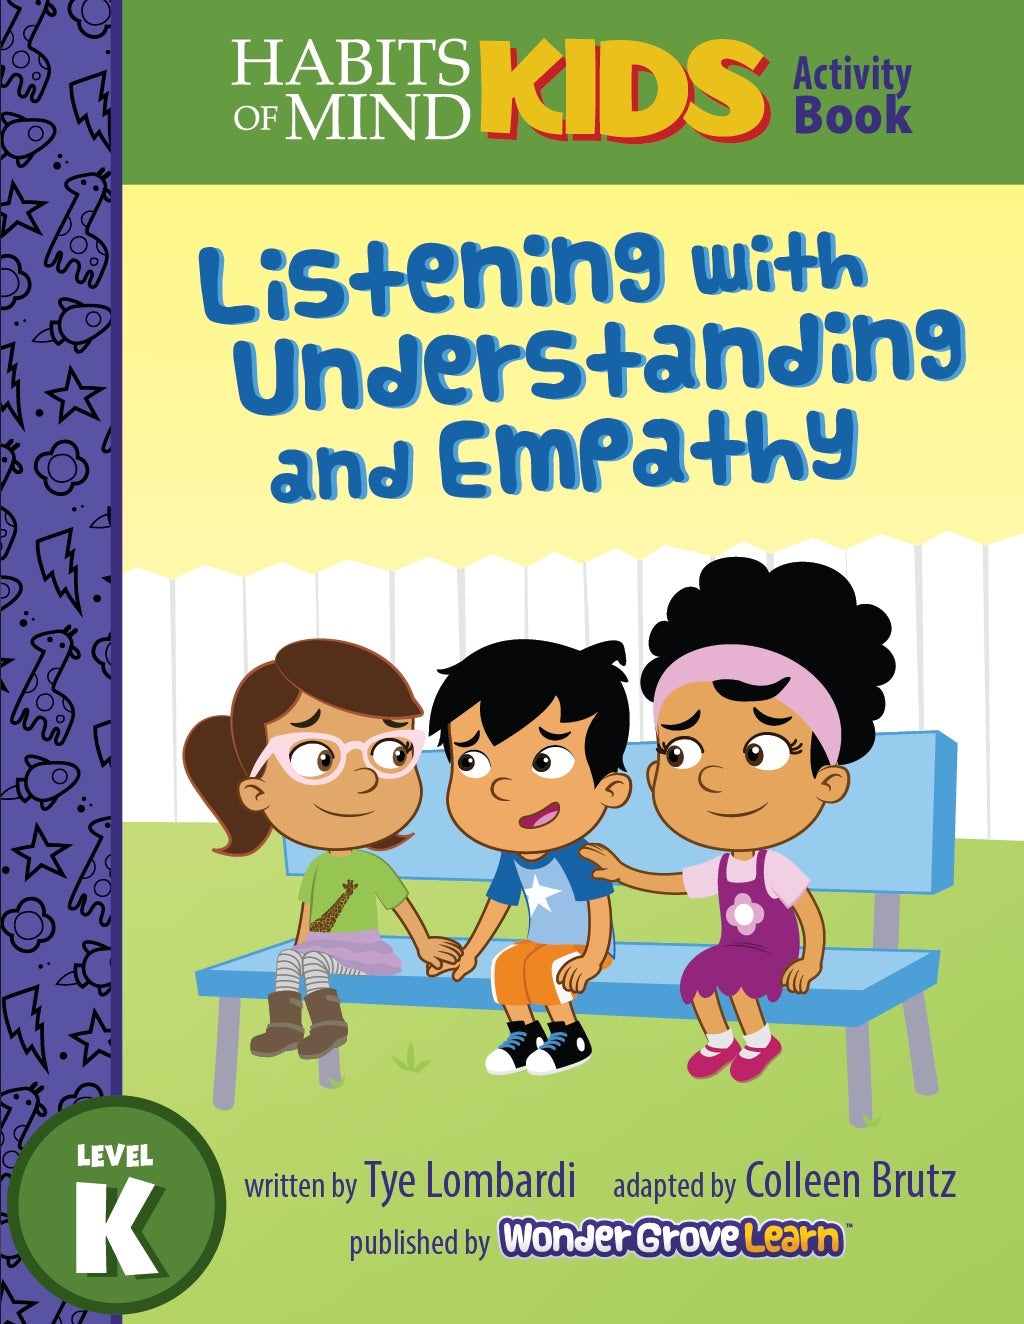 Listening with Understanding and Empathy: A Habits of Mind Story for Kindergarten